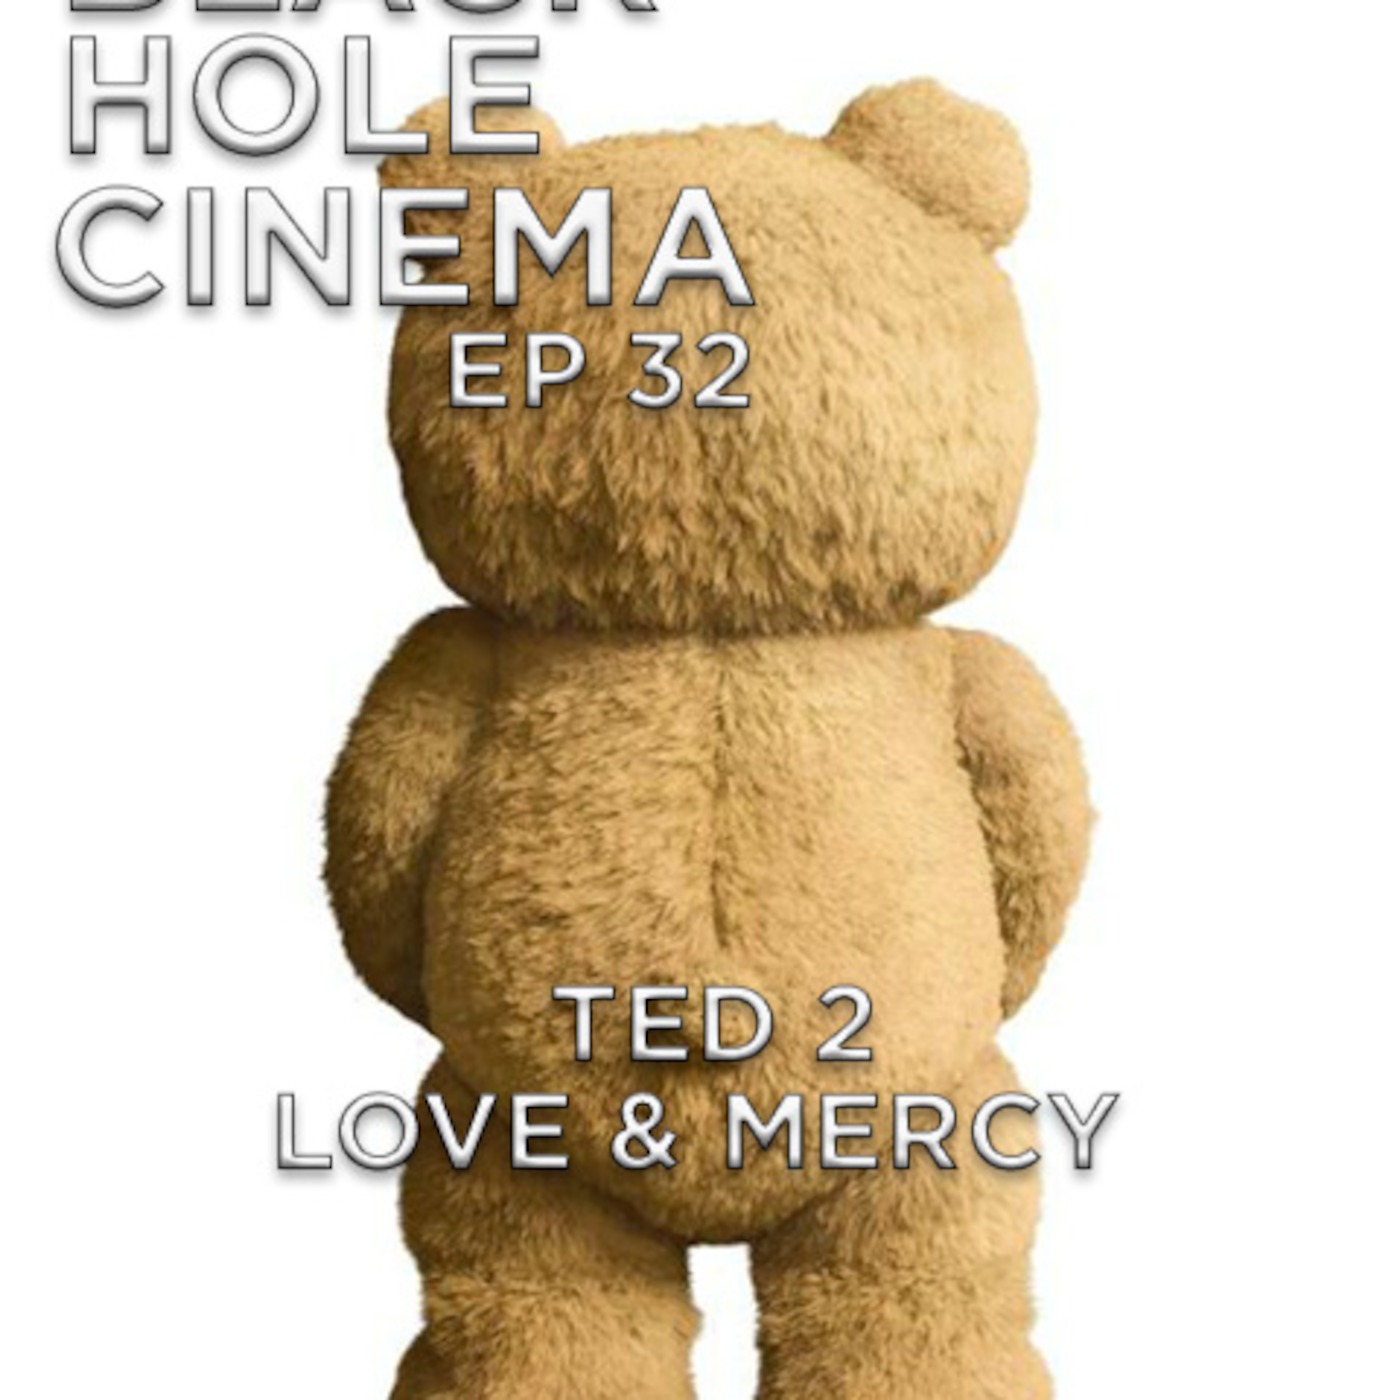 EPISODE 32 - Ted 2, Love and Mercy - 14.7.15